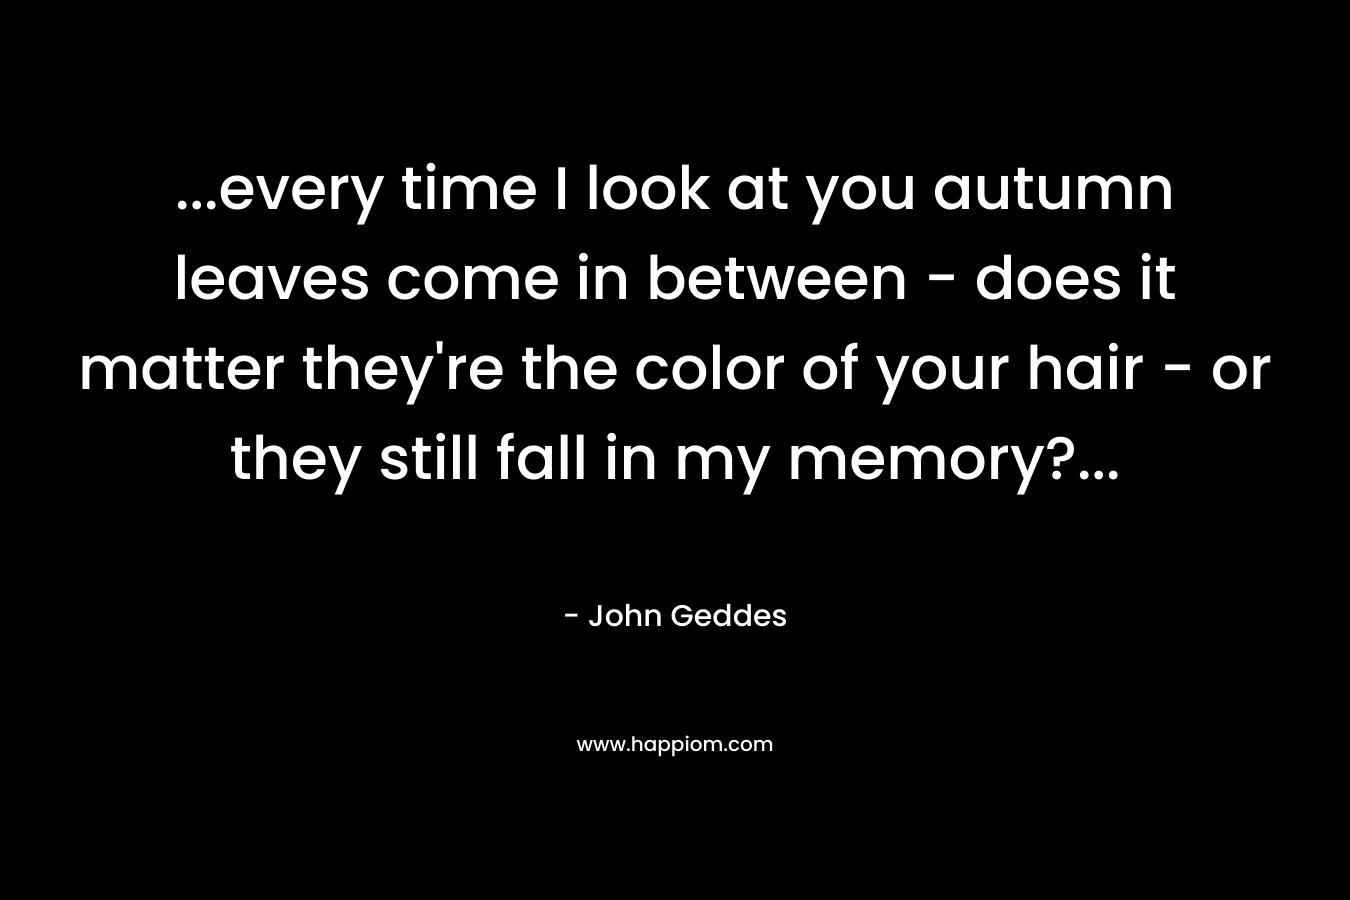 ...every time I look at you autumn leaves come in between - does it matter they're the color of your hair - or they still fall in my memory?...